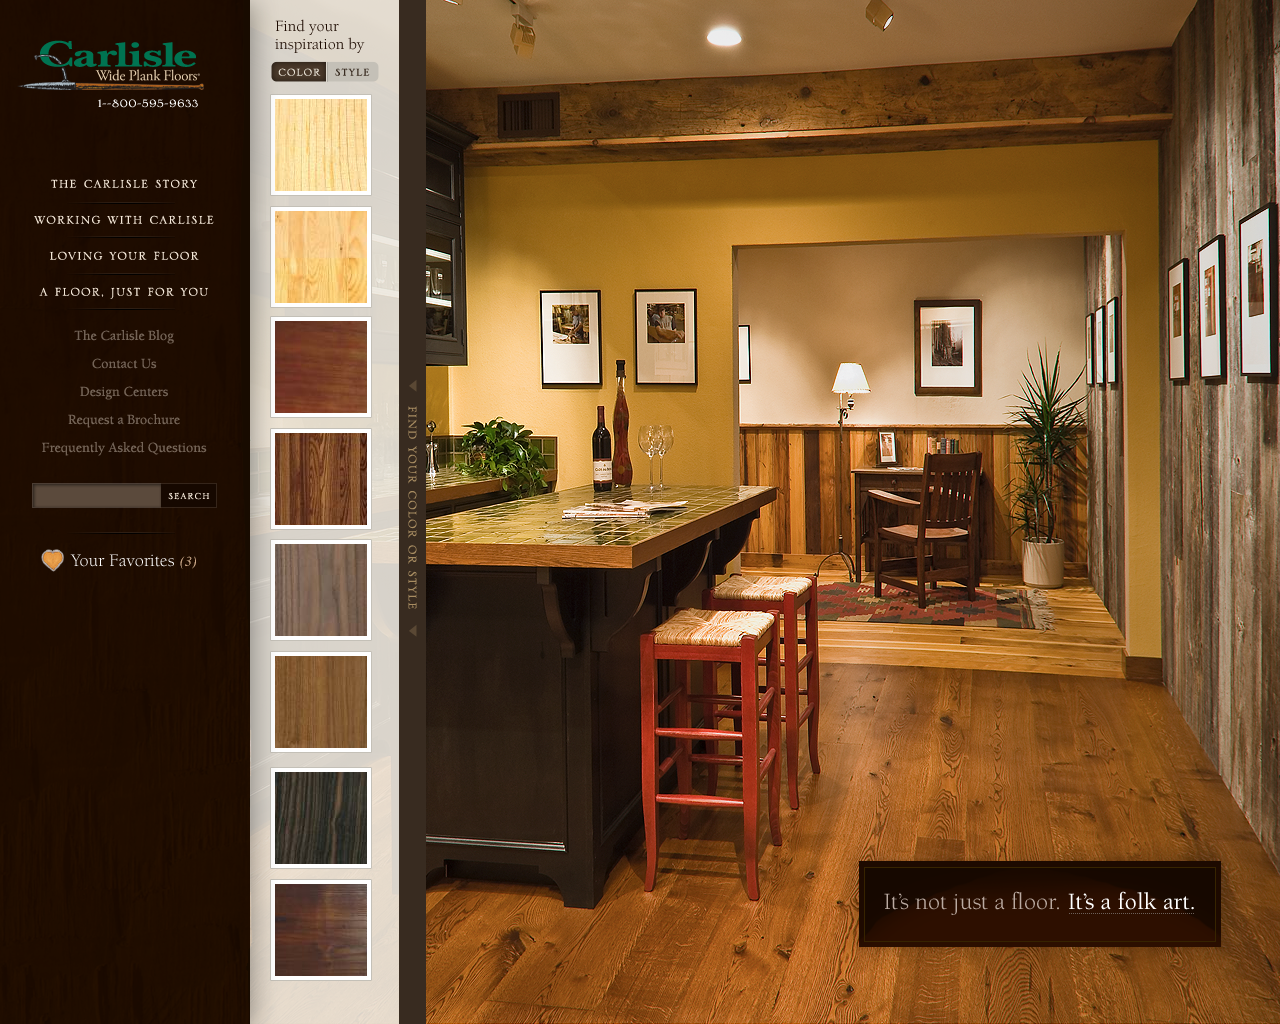 Web design concept for a homepage of the Carlisle Wide Plank Floors website